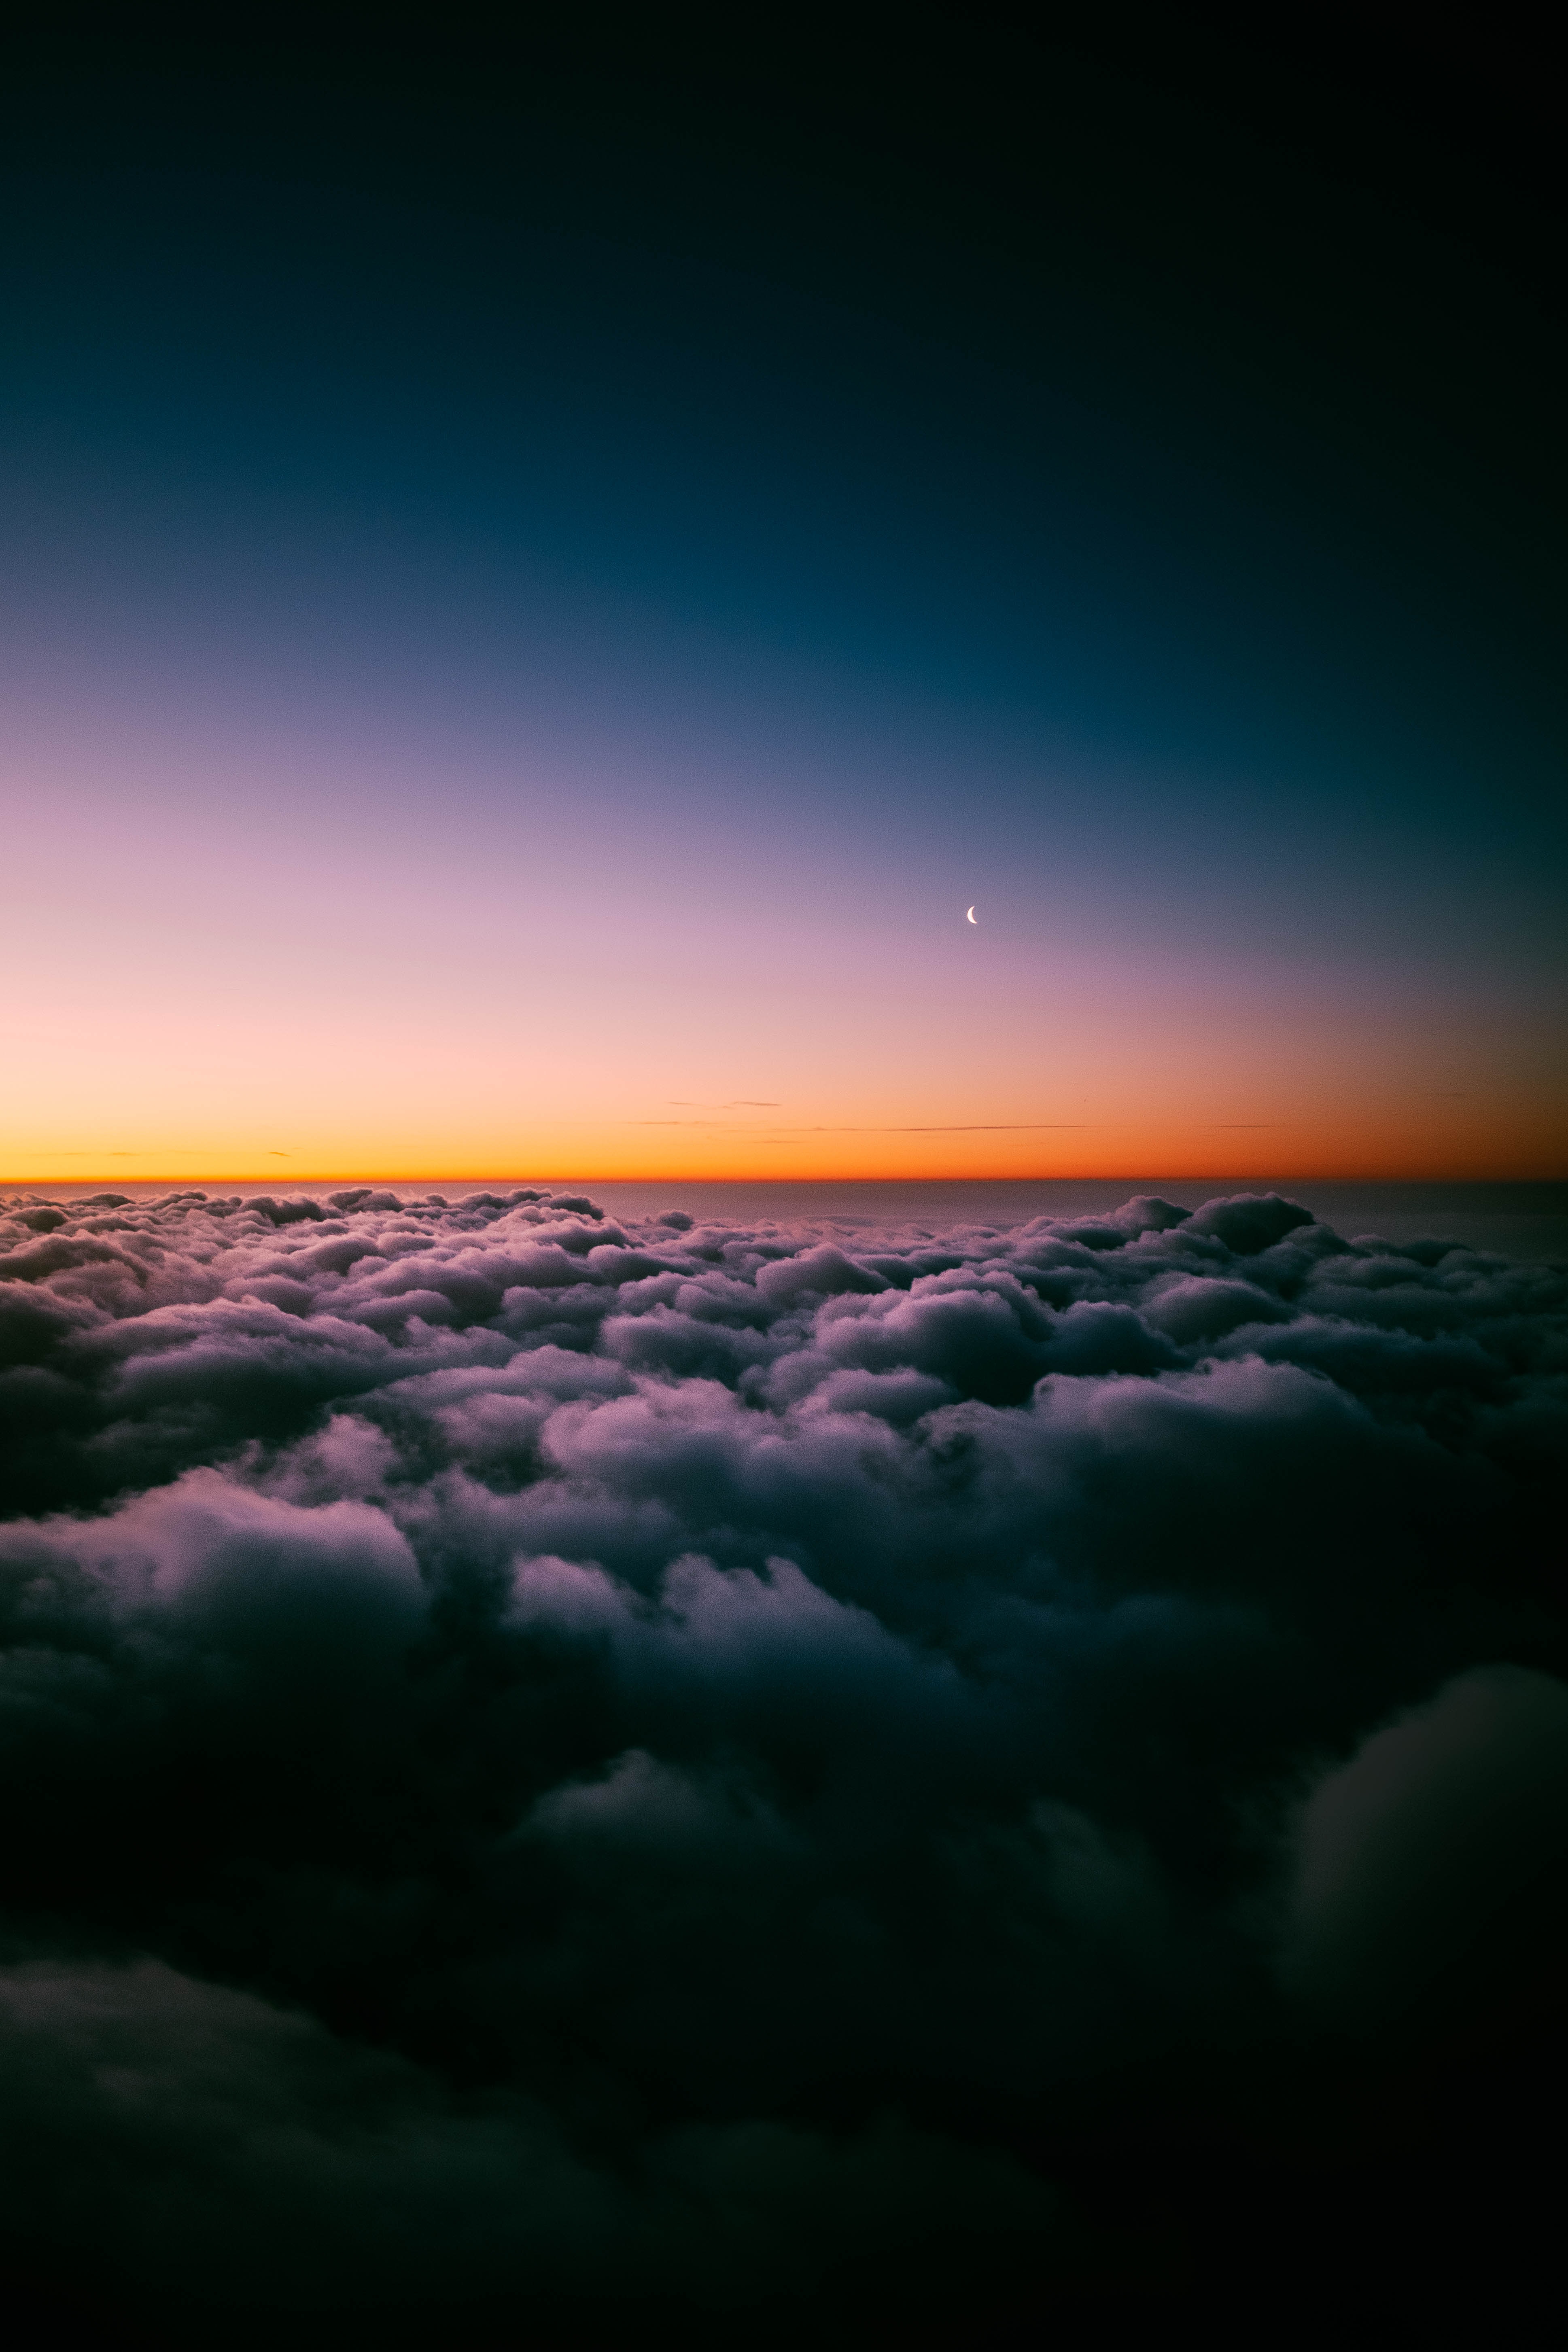 clouds, porous, above the clouds, moon, nature, sunset, twilight, dusk, sky horizon download HD wallpaper